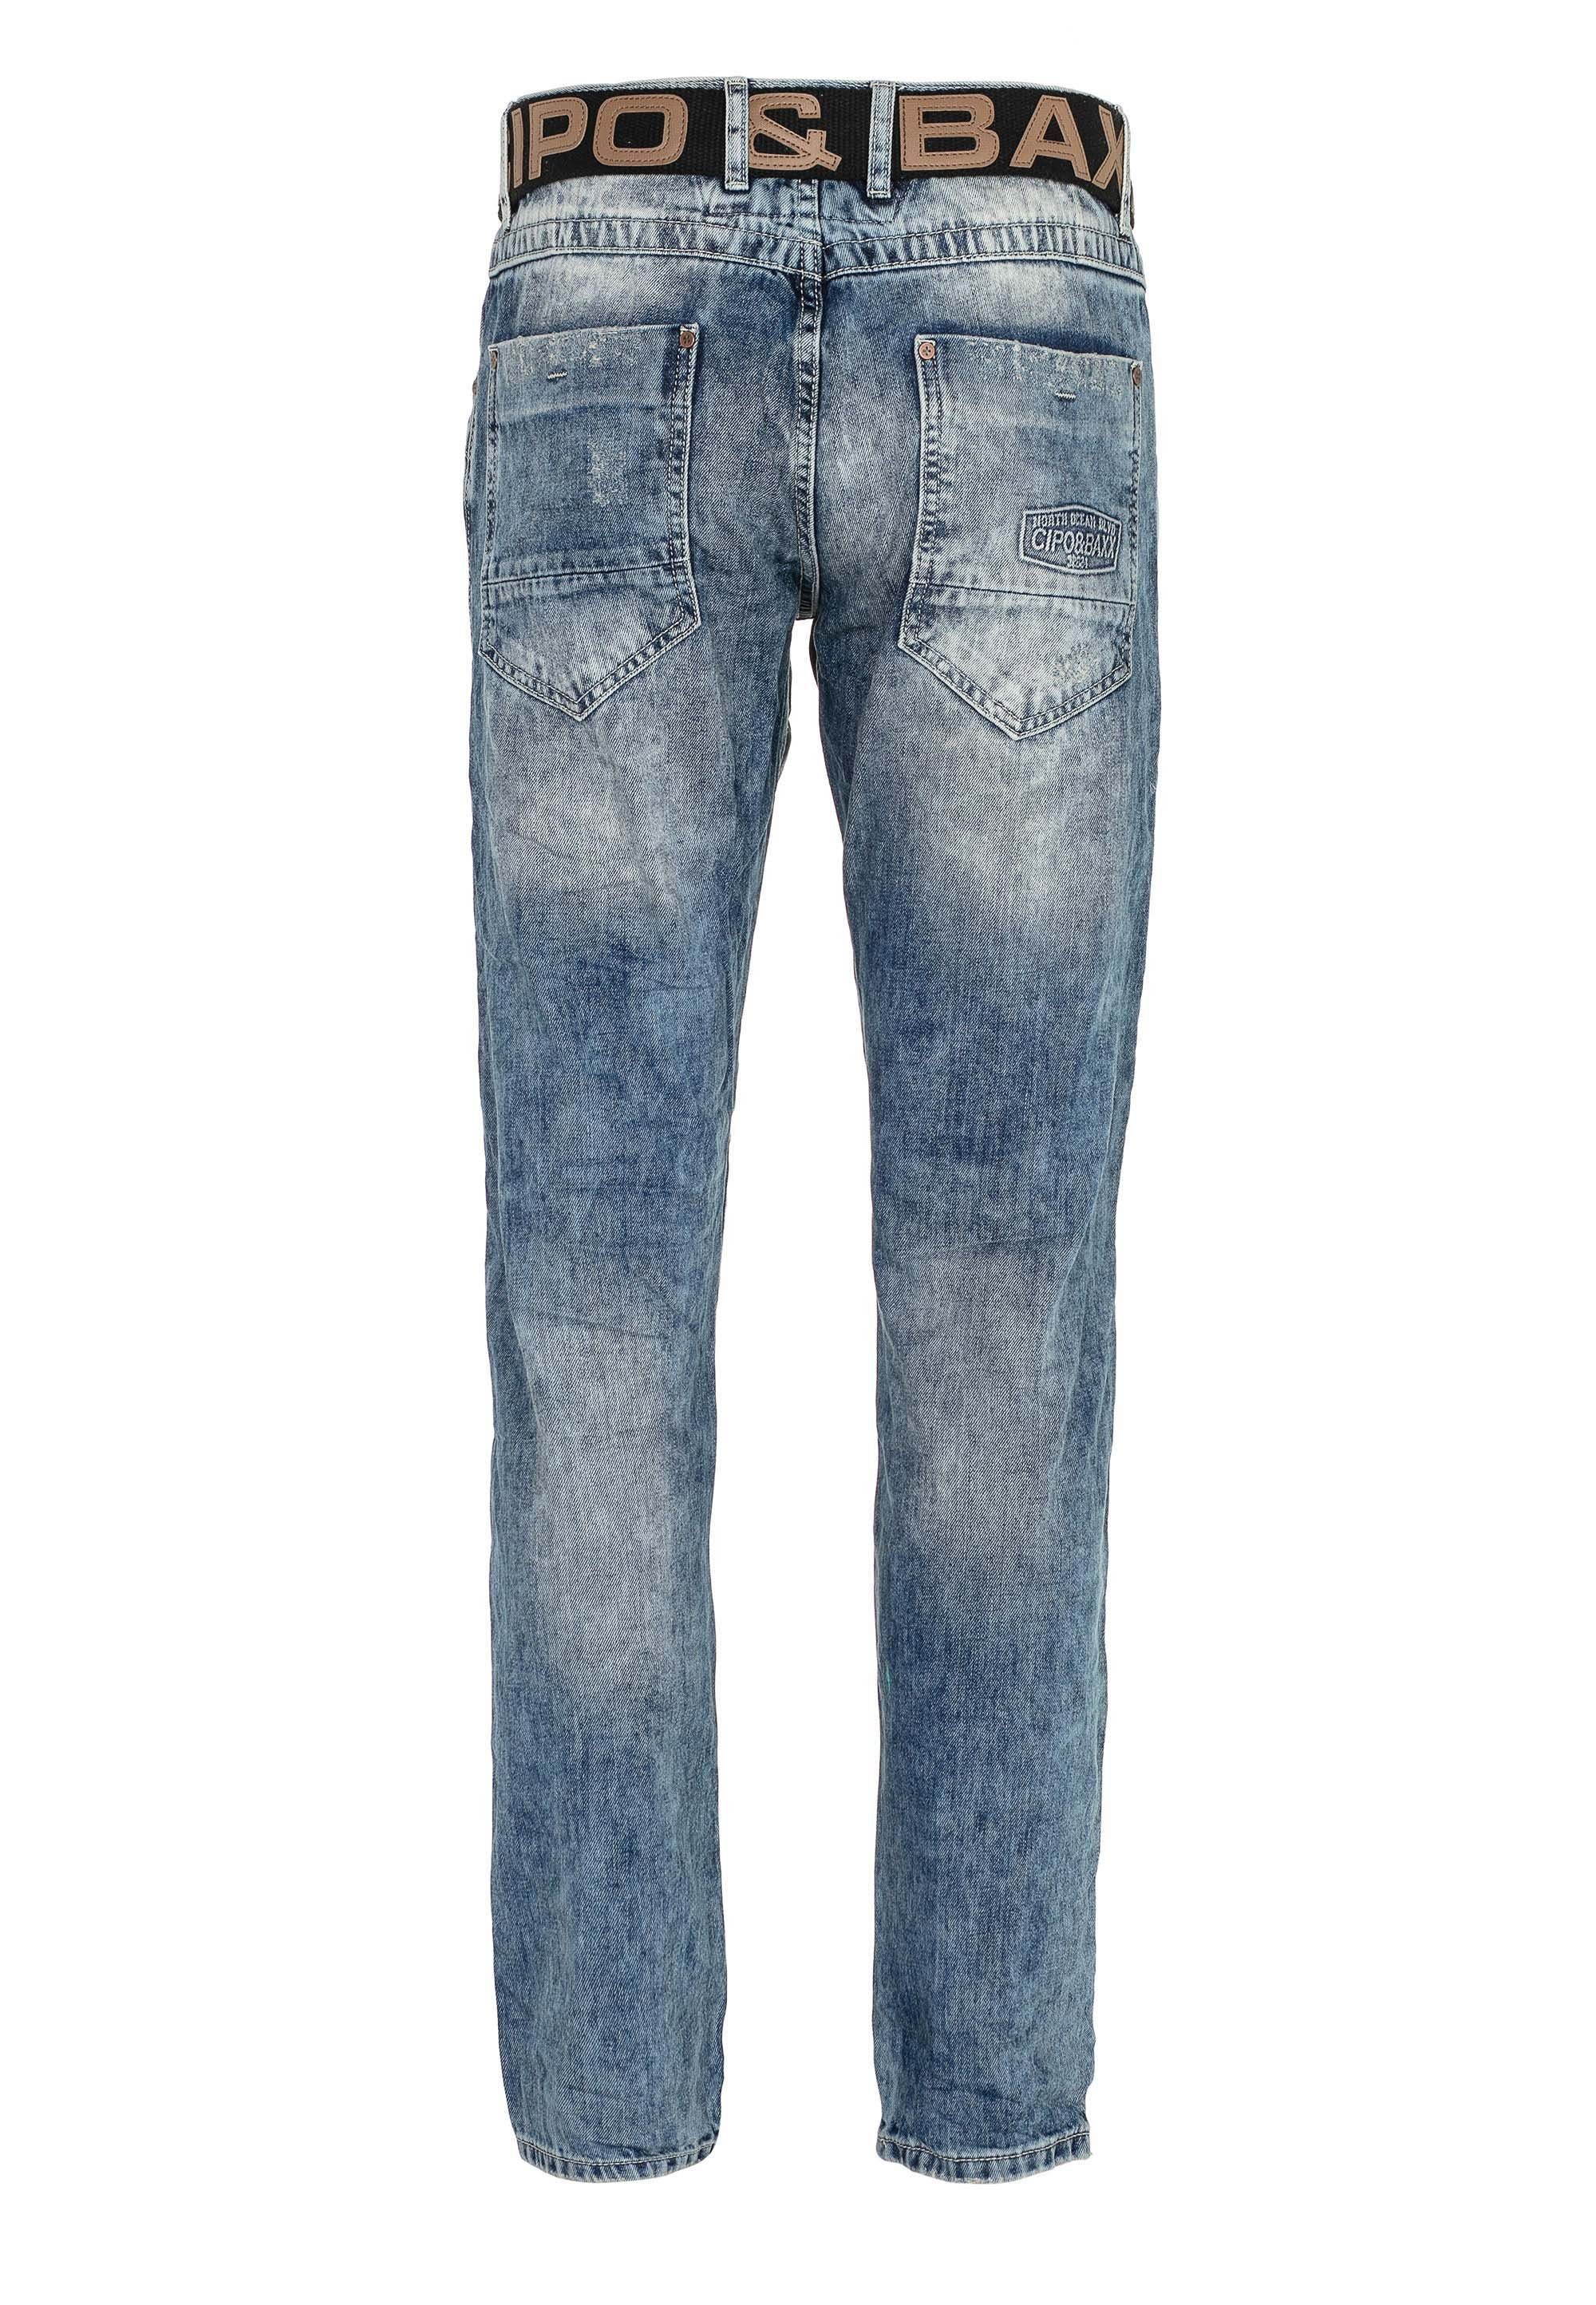 Cipo & Jeans Baxx in mit Bequeme Details Straight-Fit Ripped